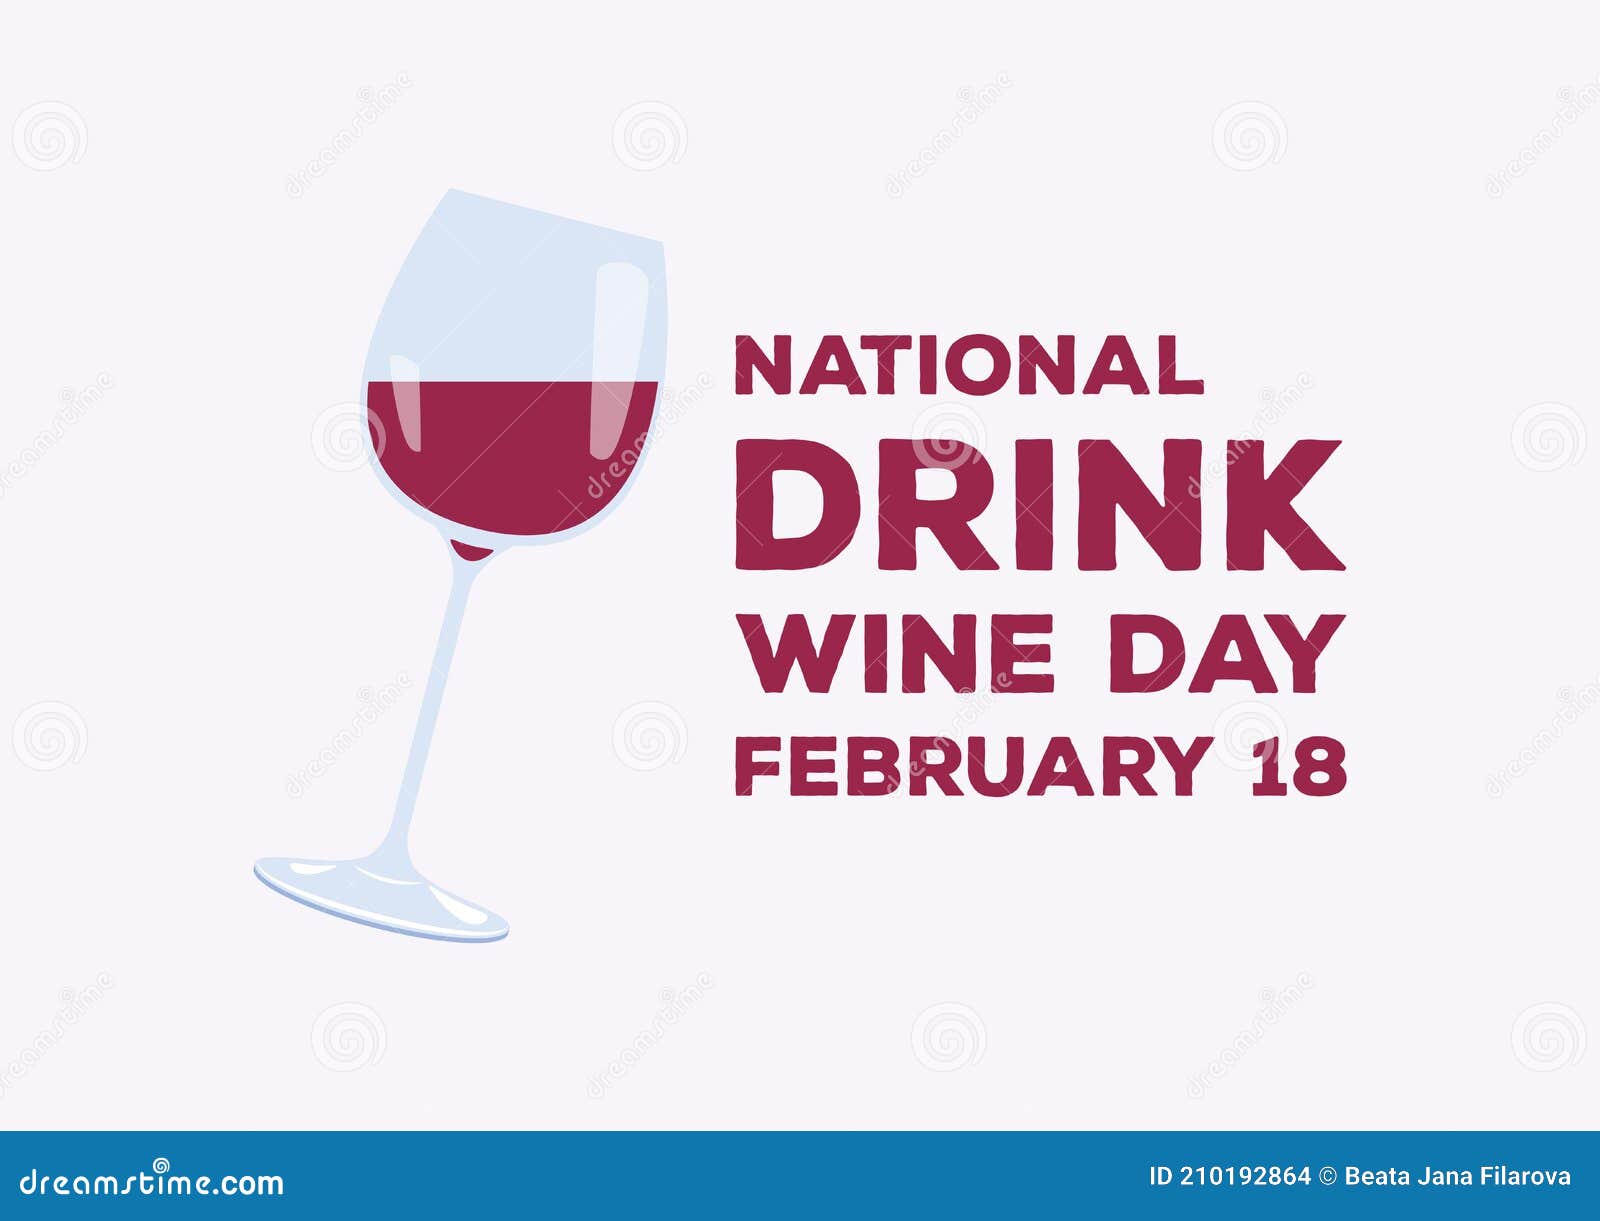 National Drink Wine Day Vector Stock Vector Illustration of